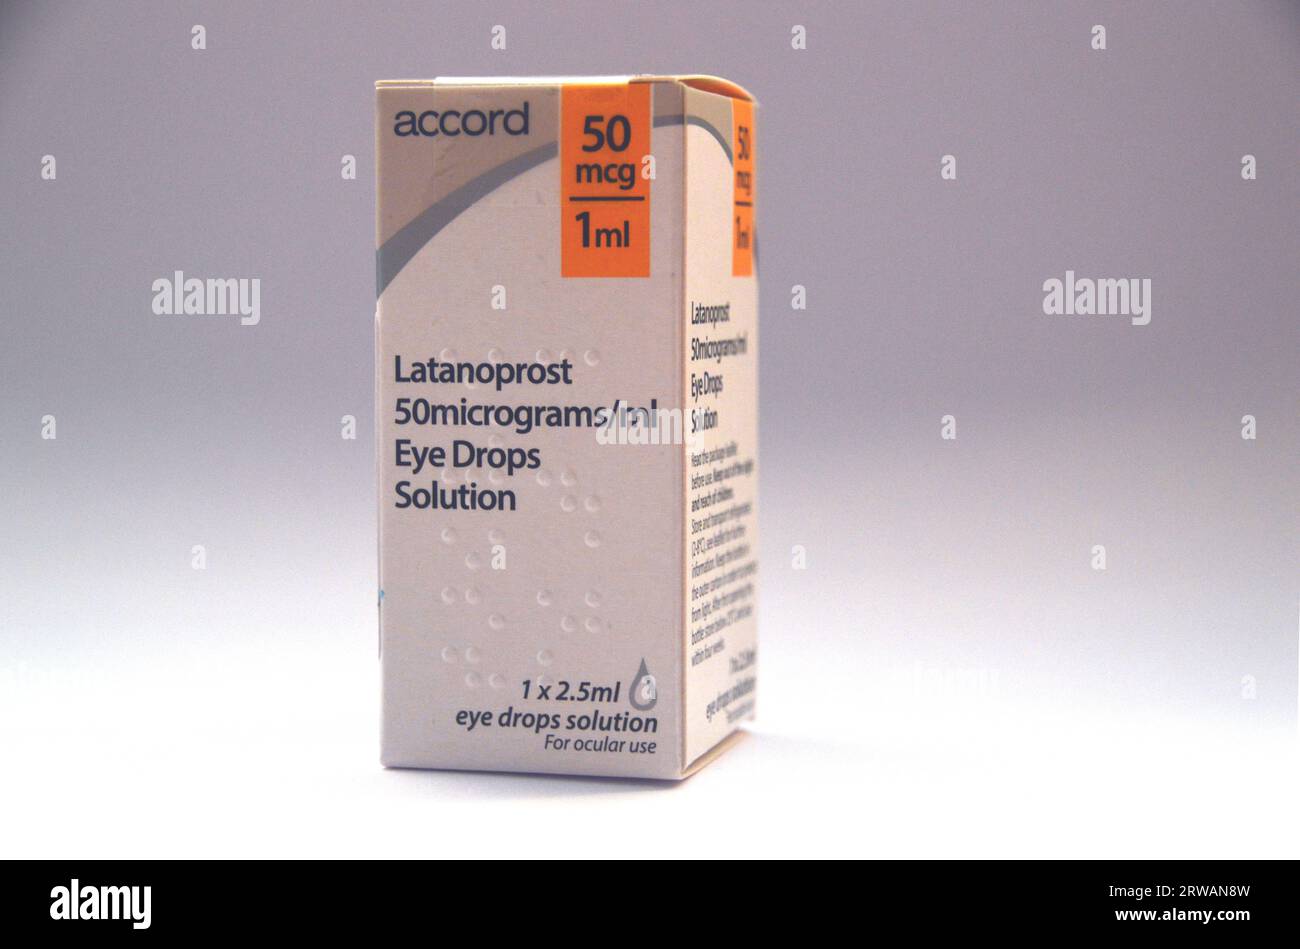 Small Box of Latanoprost 50mg/ml + 1mg/ml Daily Eye Drop Solution by Accord to Treat Glaucoma and Ocular Hypertension. Stock Photo